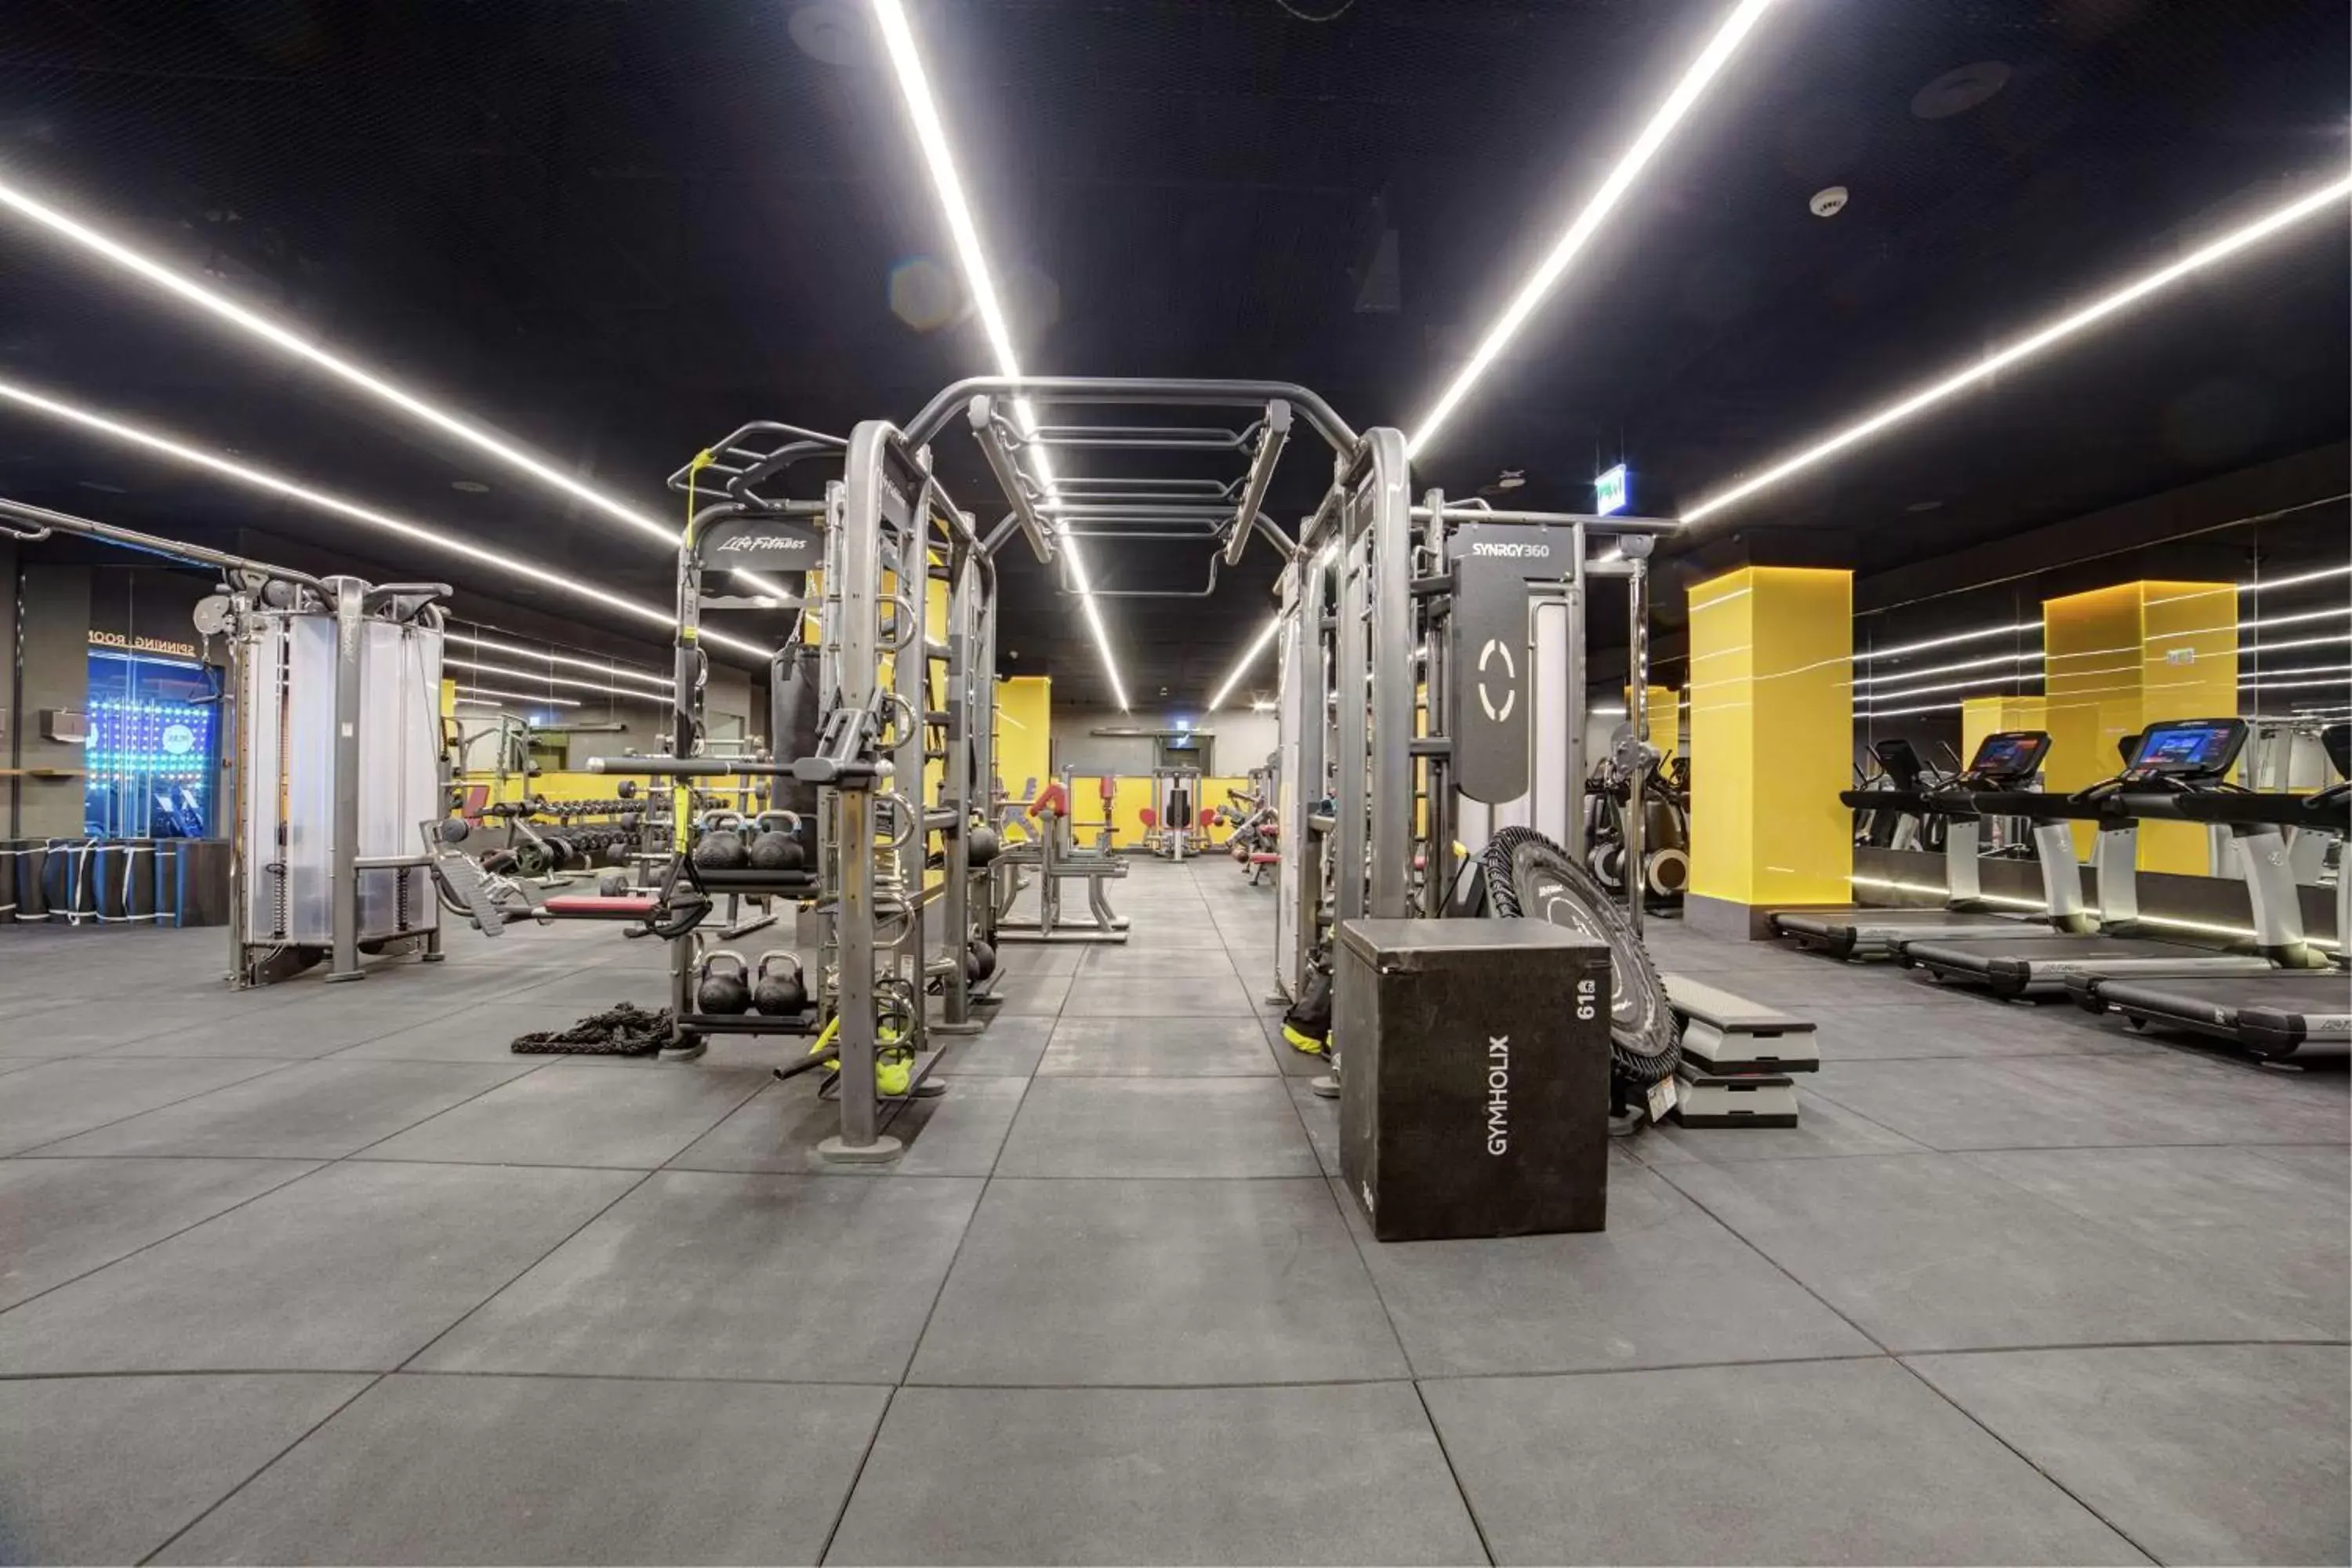 Fitness centre/facilities, Fitness Center/Facilities in DoubleTree by Hilton Adana